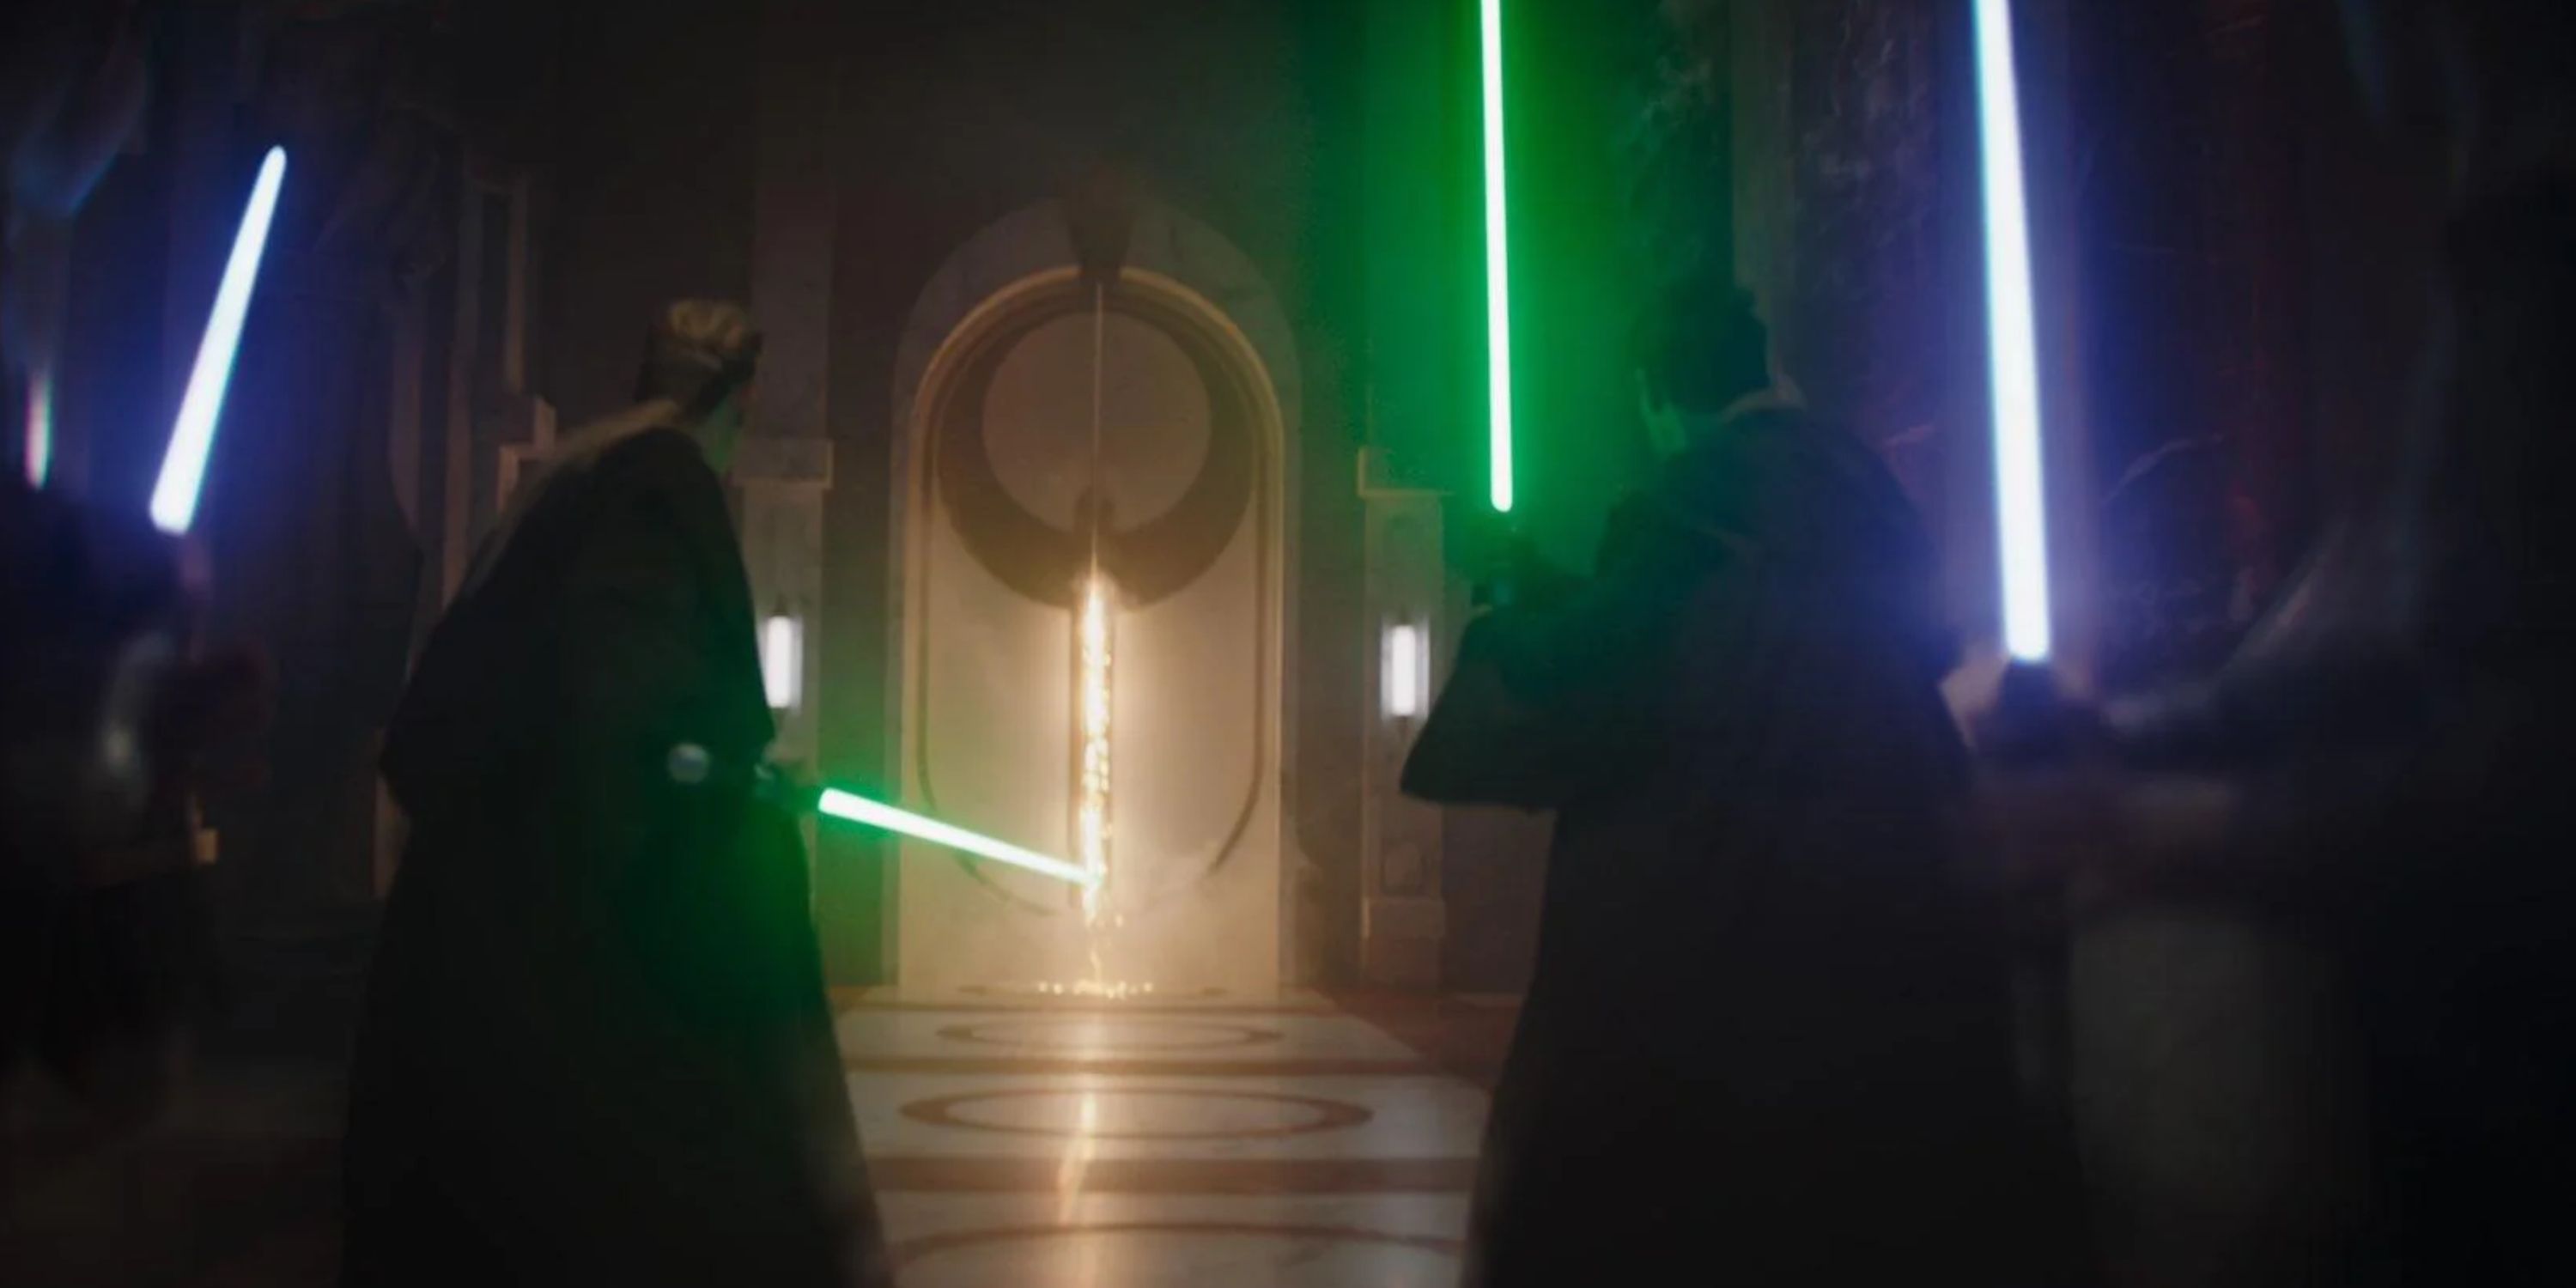 The Jedi Temple during Order 66 from Star Wars The Mandalorian Season 3 Episode 4 The Foundling